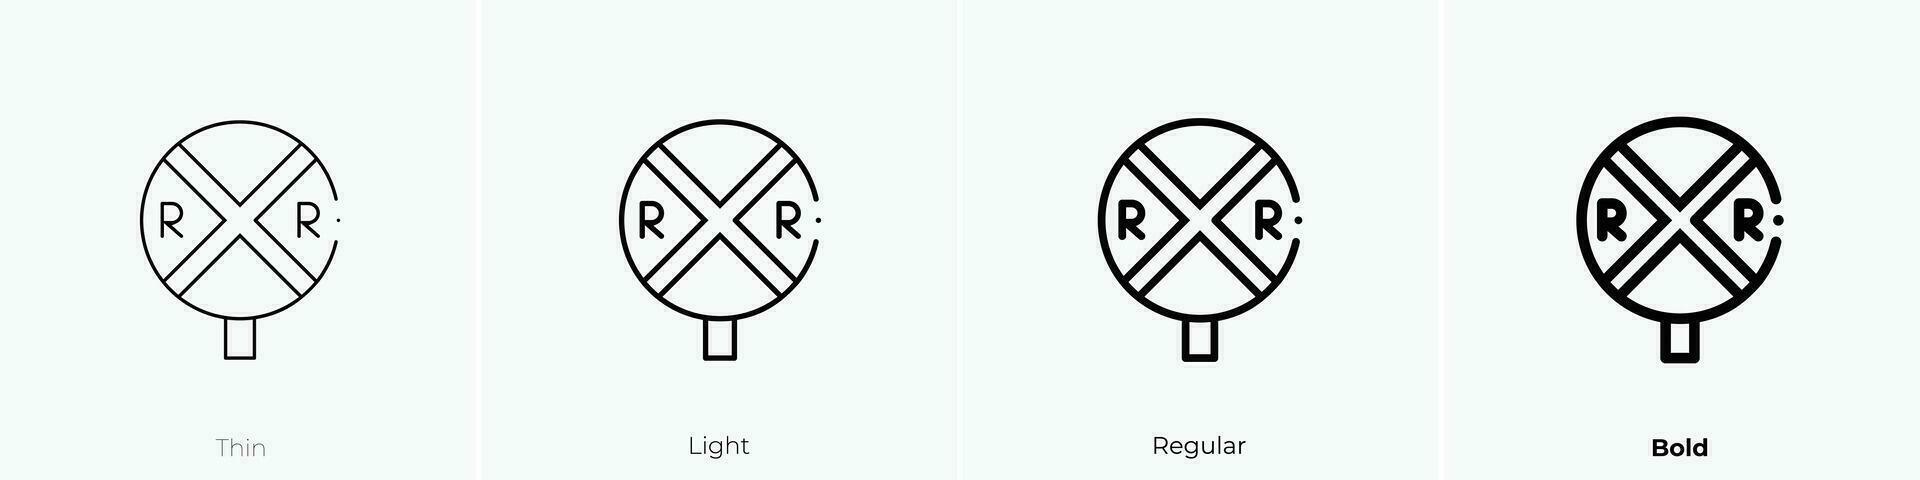 railroad icon. Thin, Light, Regular And Bold style design isolated on white background vector